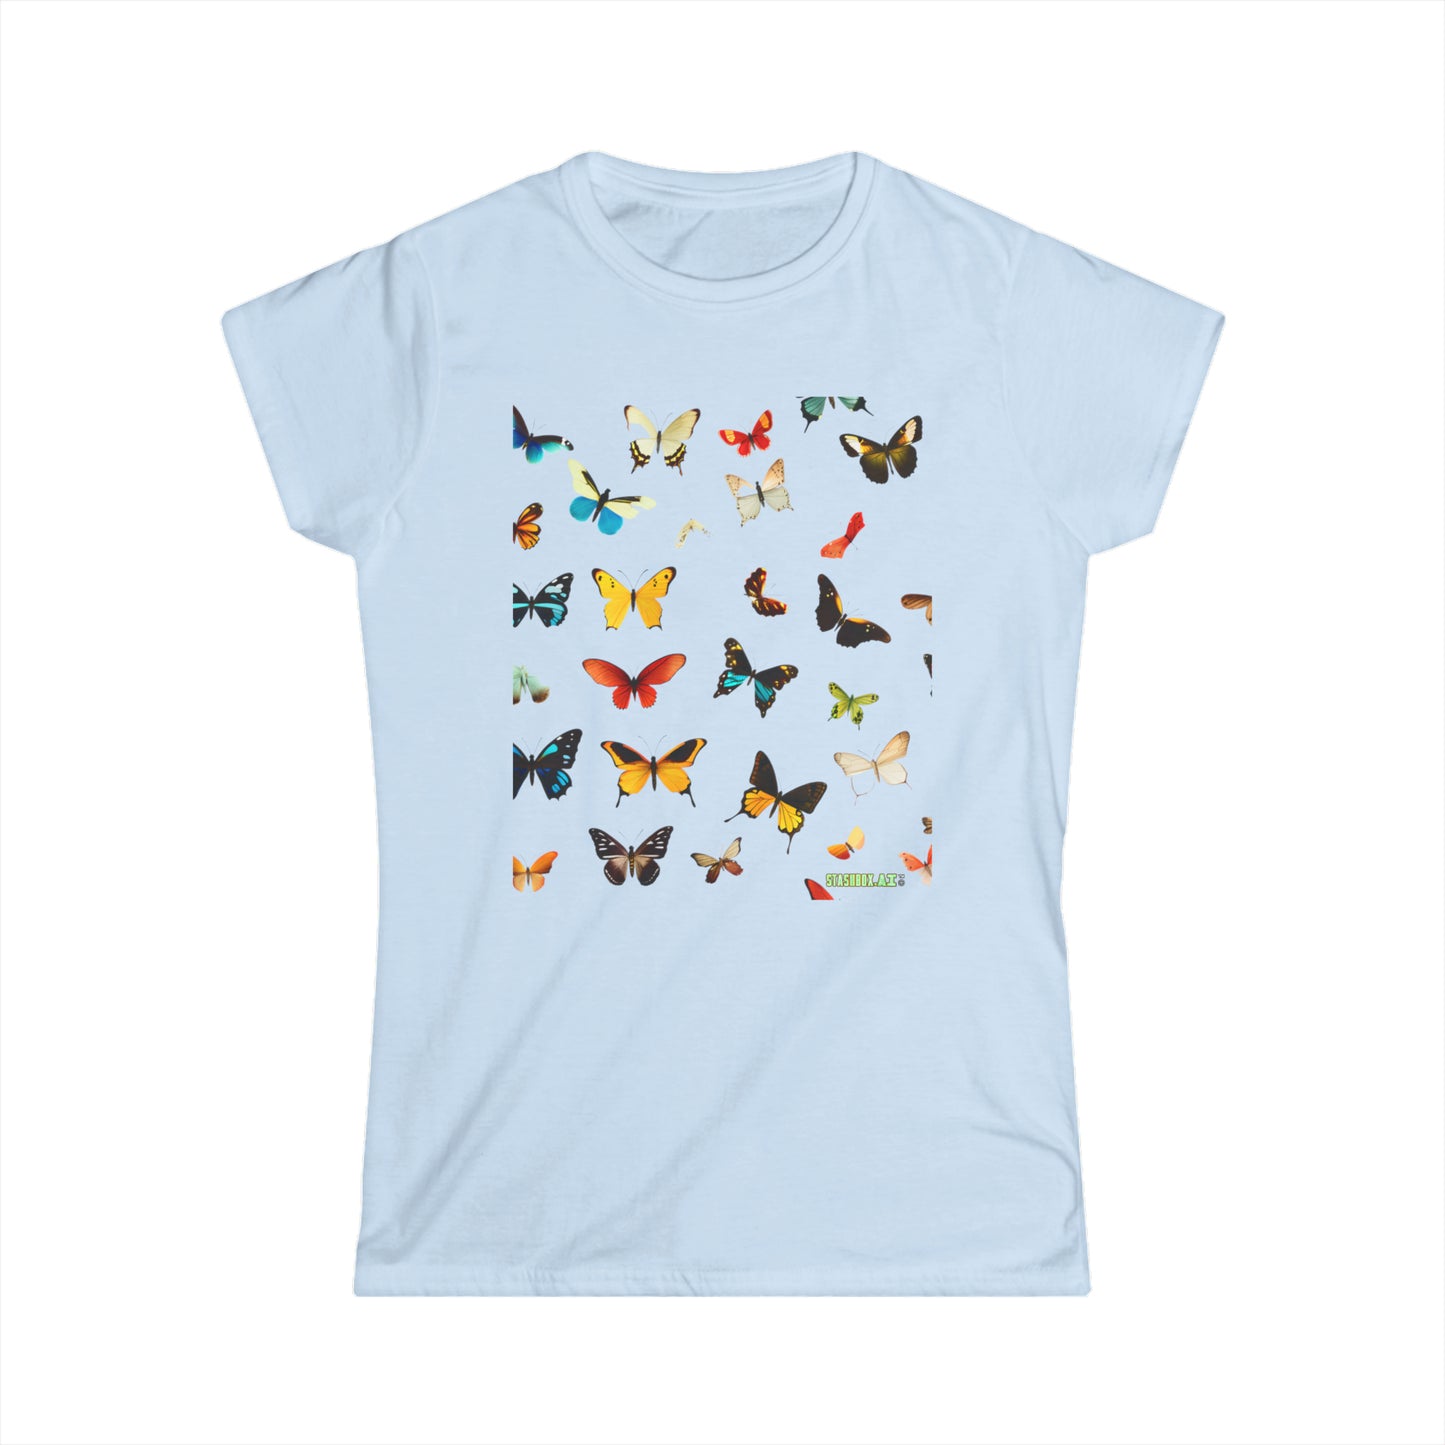 Women's Softstyle Tee - Colorful Geometric Butterfly 005